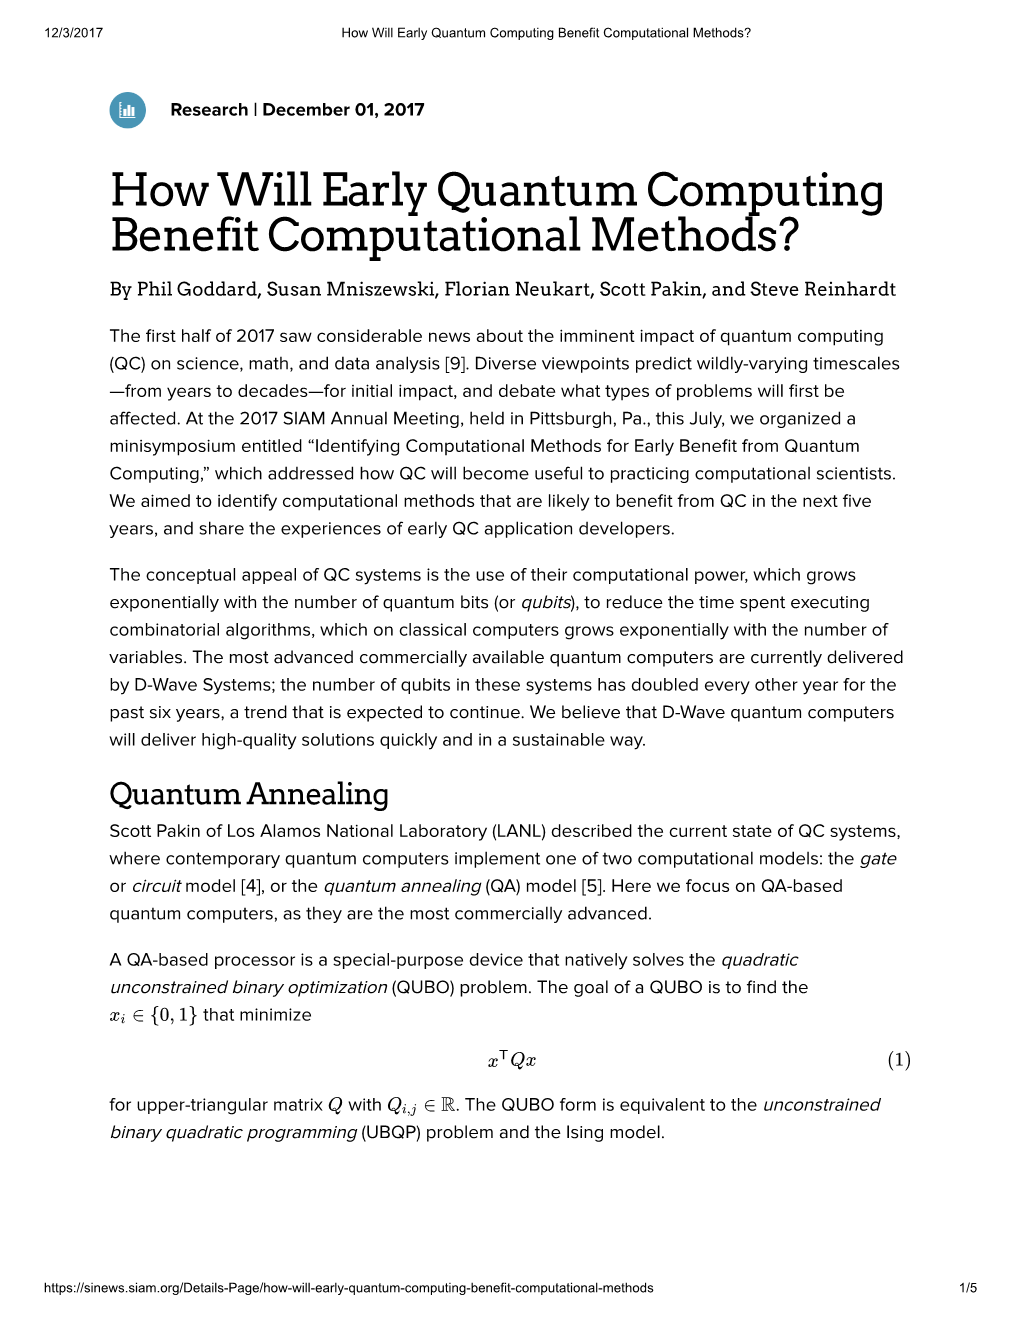 How Will Early Quantum Computing Benefit Computational Methods?